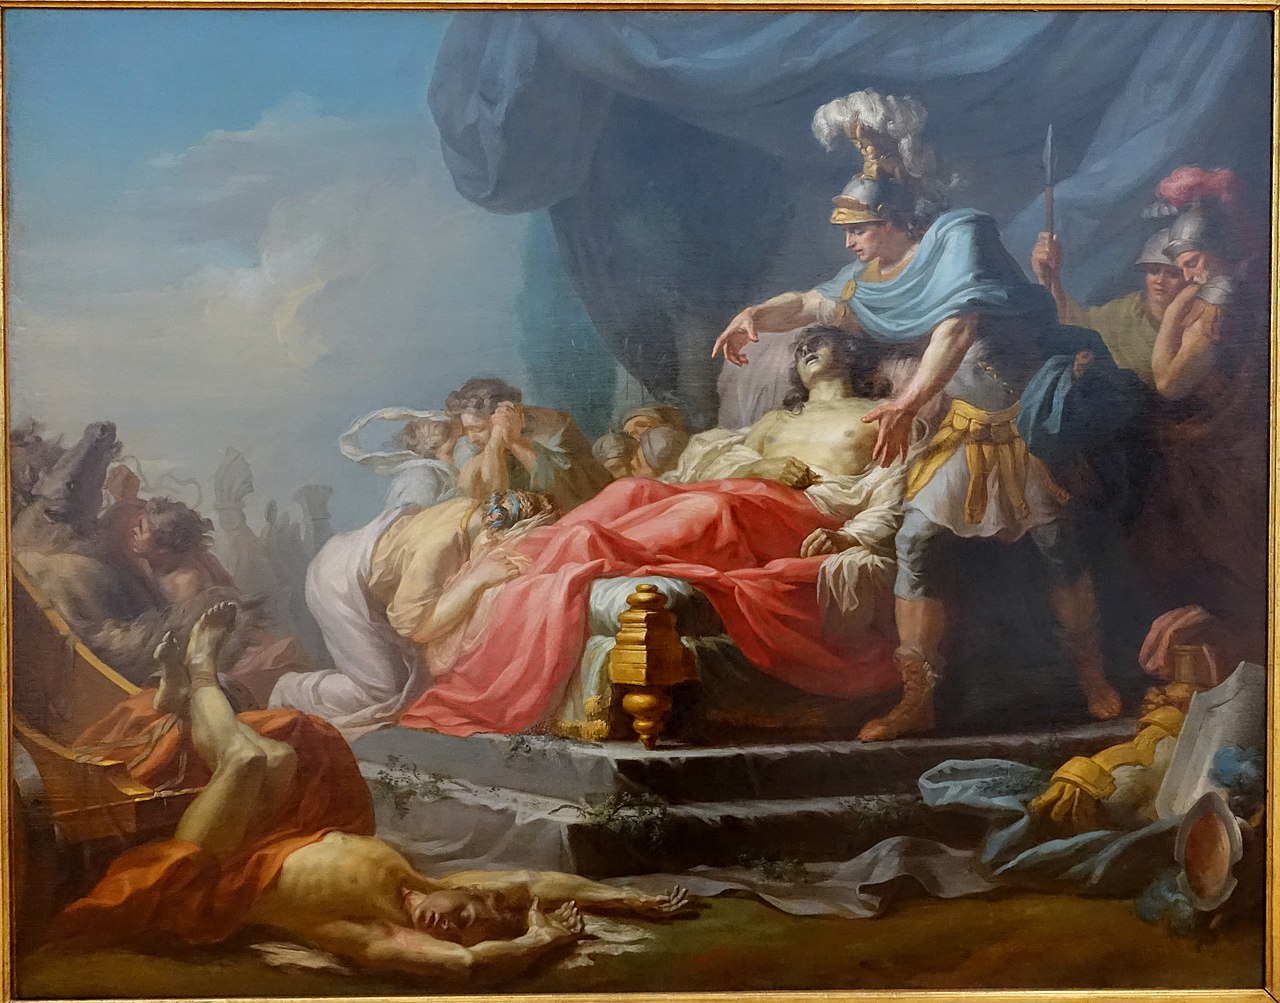 1280px-Achilles_Displaying_the_Body_of_Hector_at_the_Feet_of_Patroclus,_by_Jean_Joseph_Taillason,_1769,_oil_on_canvas_-_Krannert_Art_Museum,_UIUC_-_DSC06264.jpg